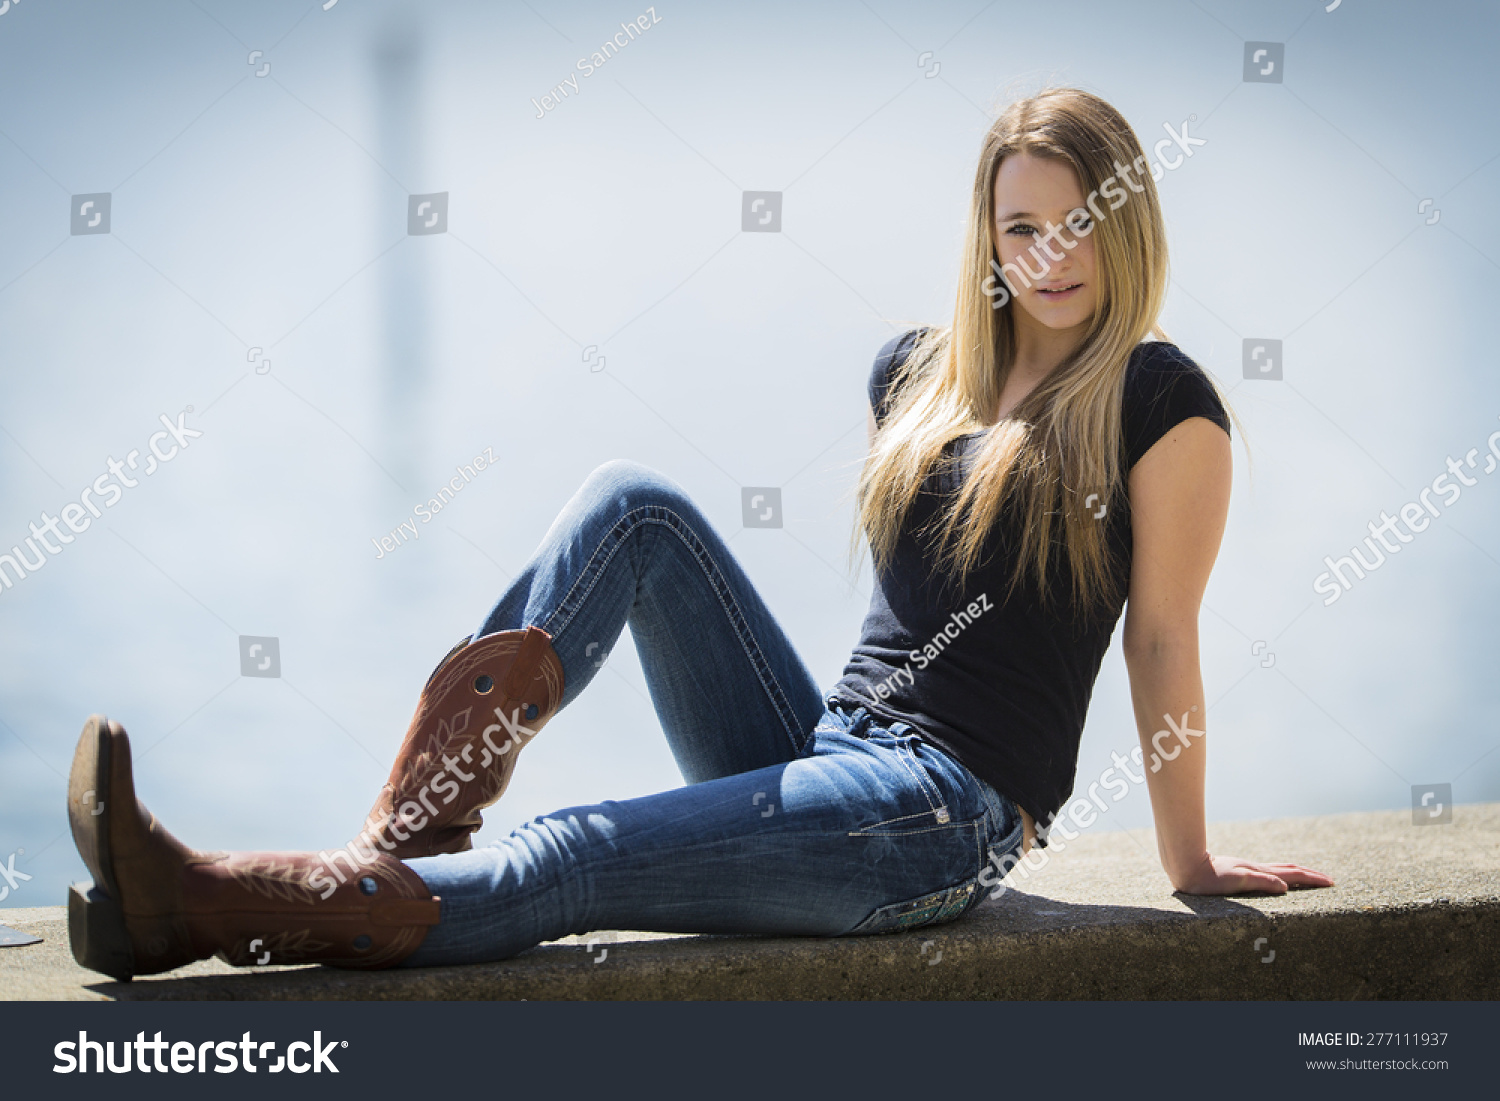 Blonde in boots